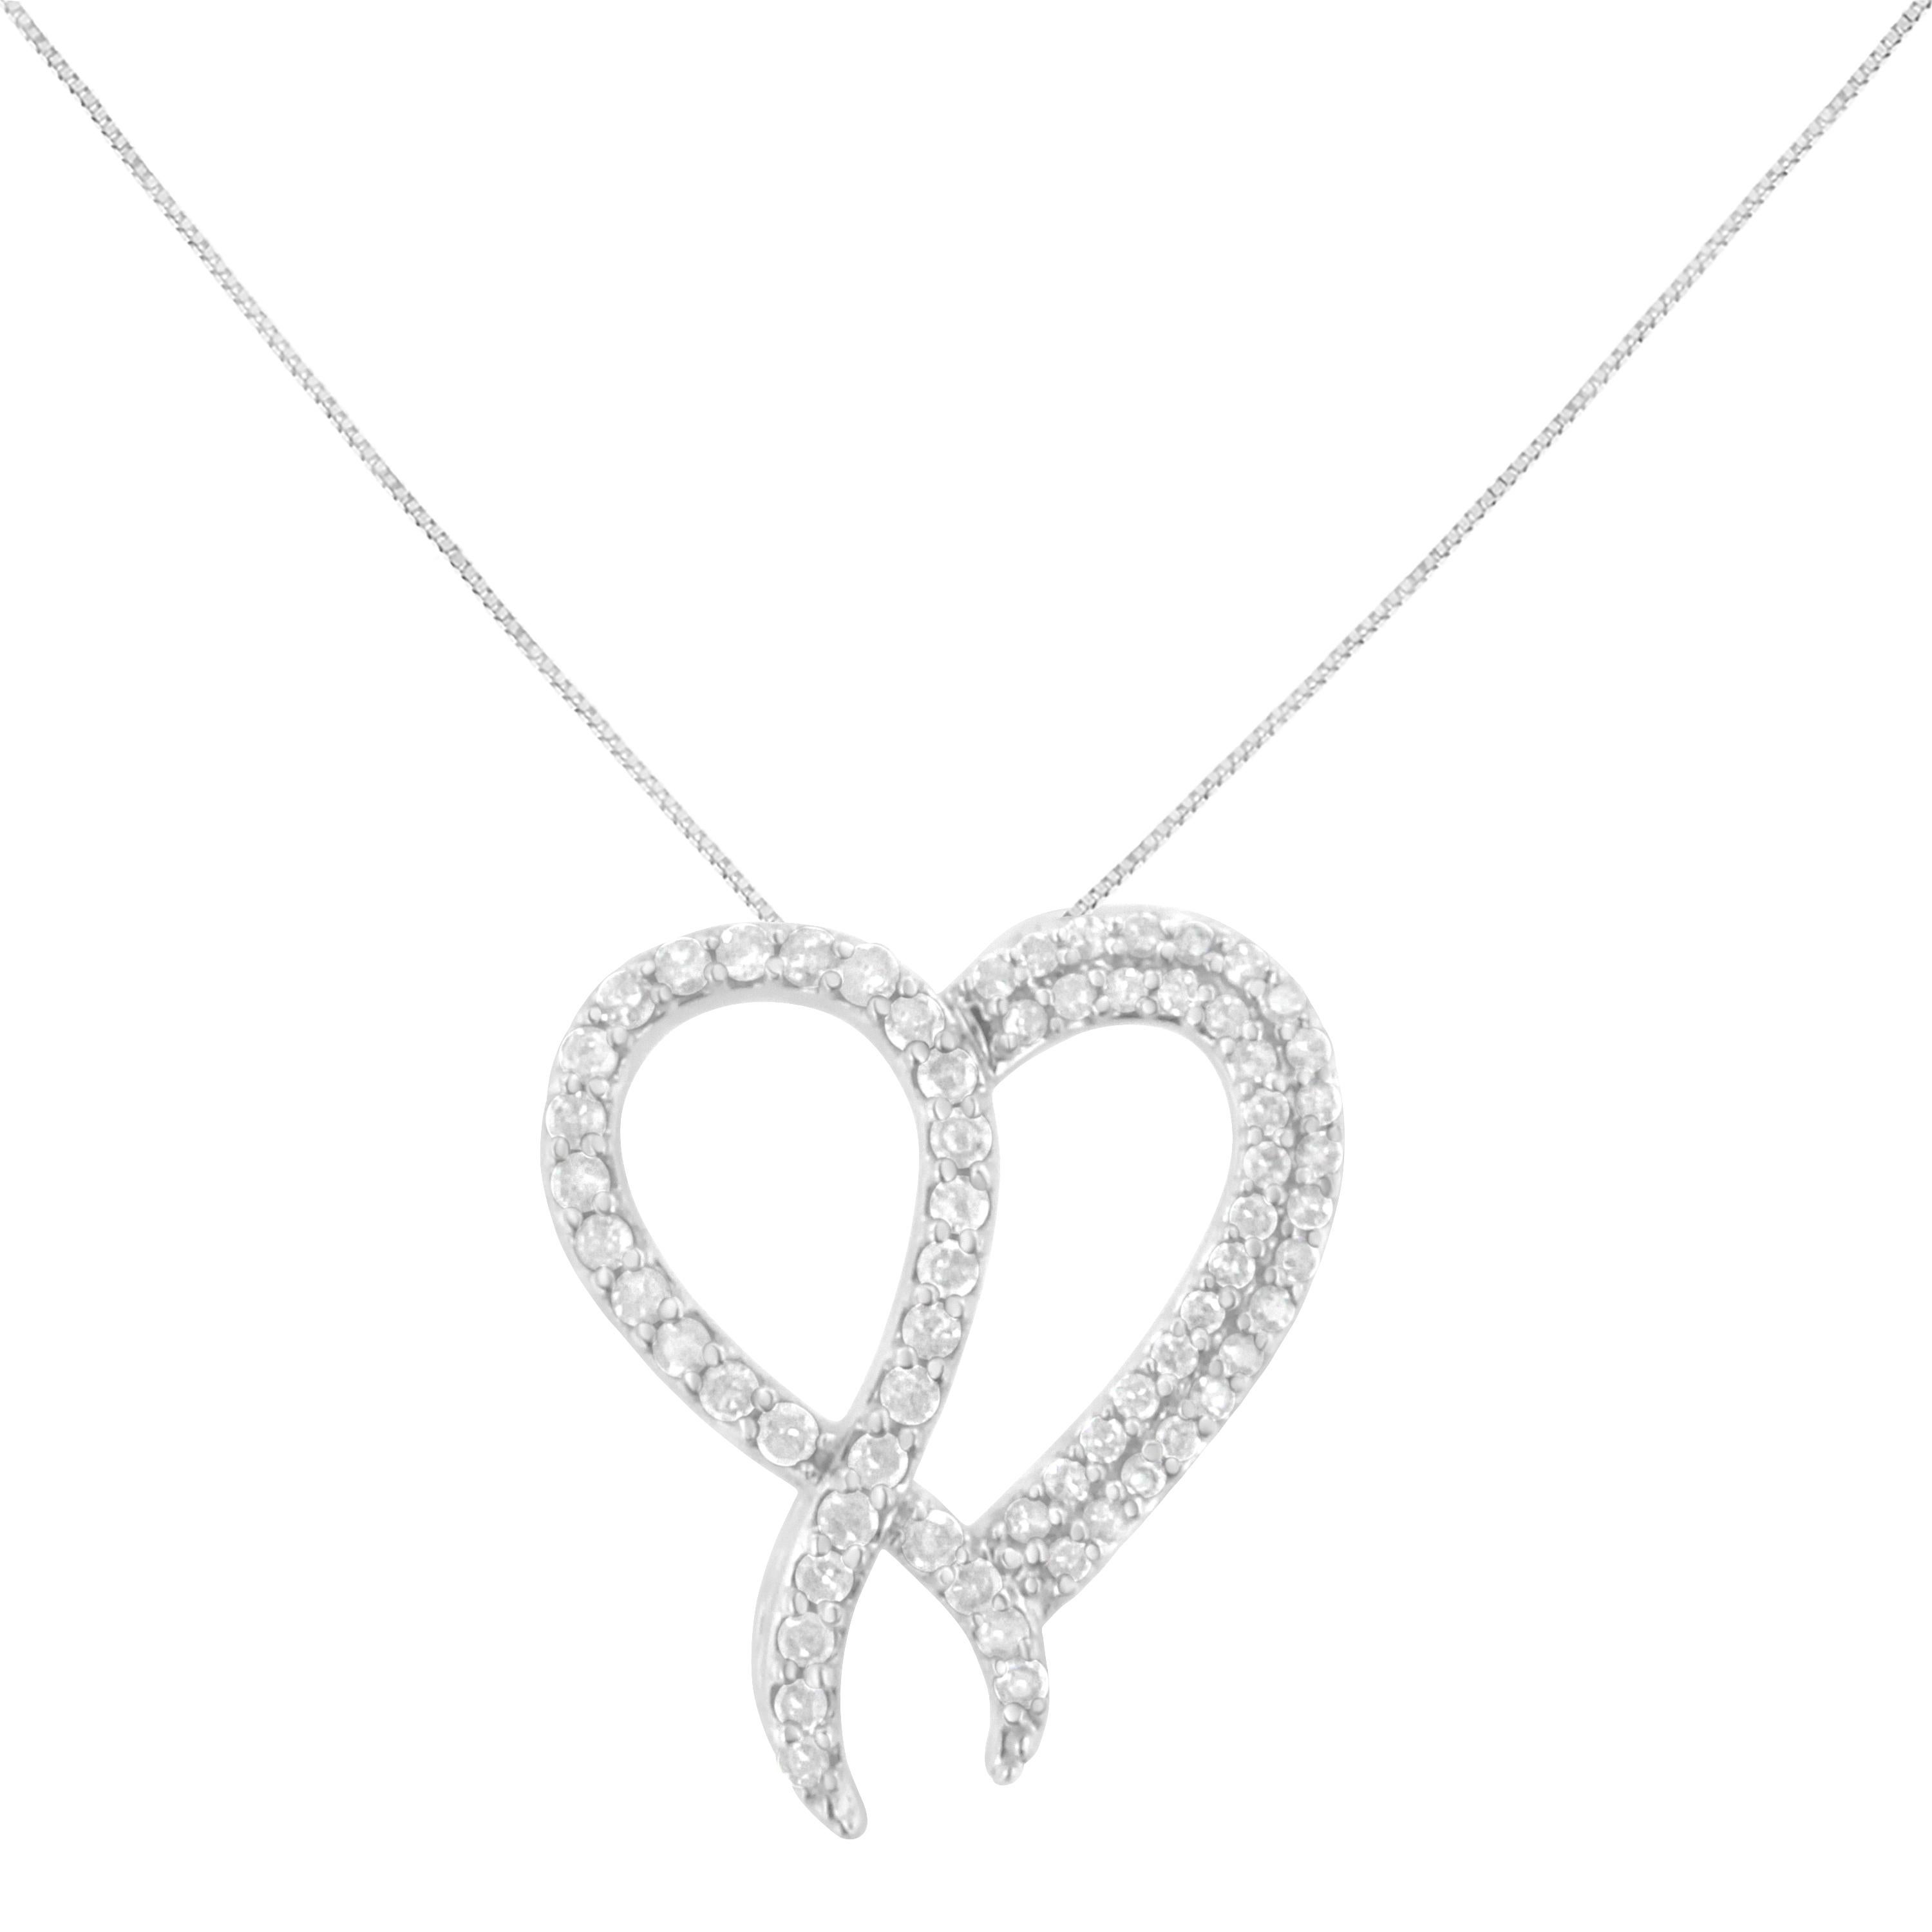 This elegant .925 sterling silver pendant has a gorgeous heart motif with a ribbon overlapping to one side. The necklace is studded with 1 ct tdw of beautiful, round-cut diamonds in a prong setting. This piece comes with a sterling silver 18